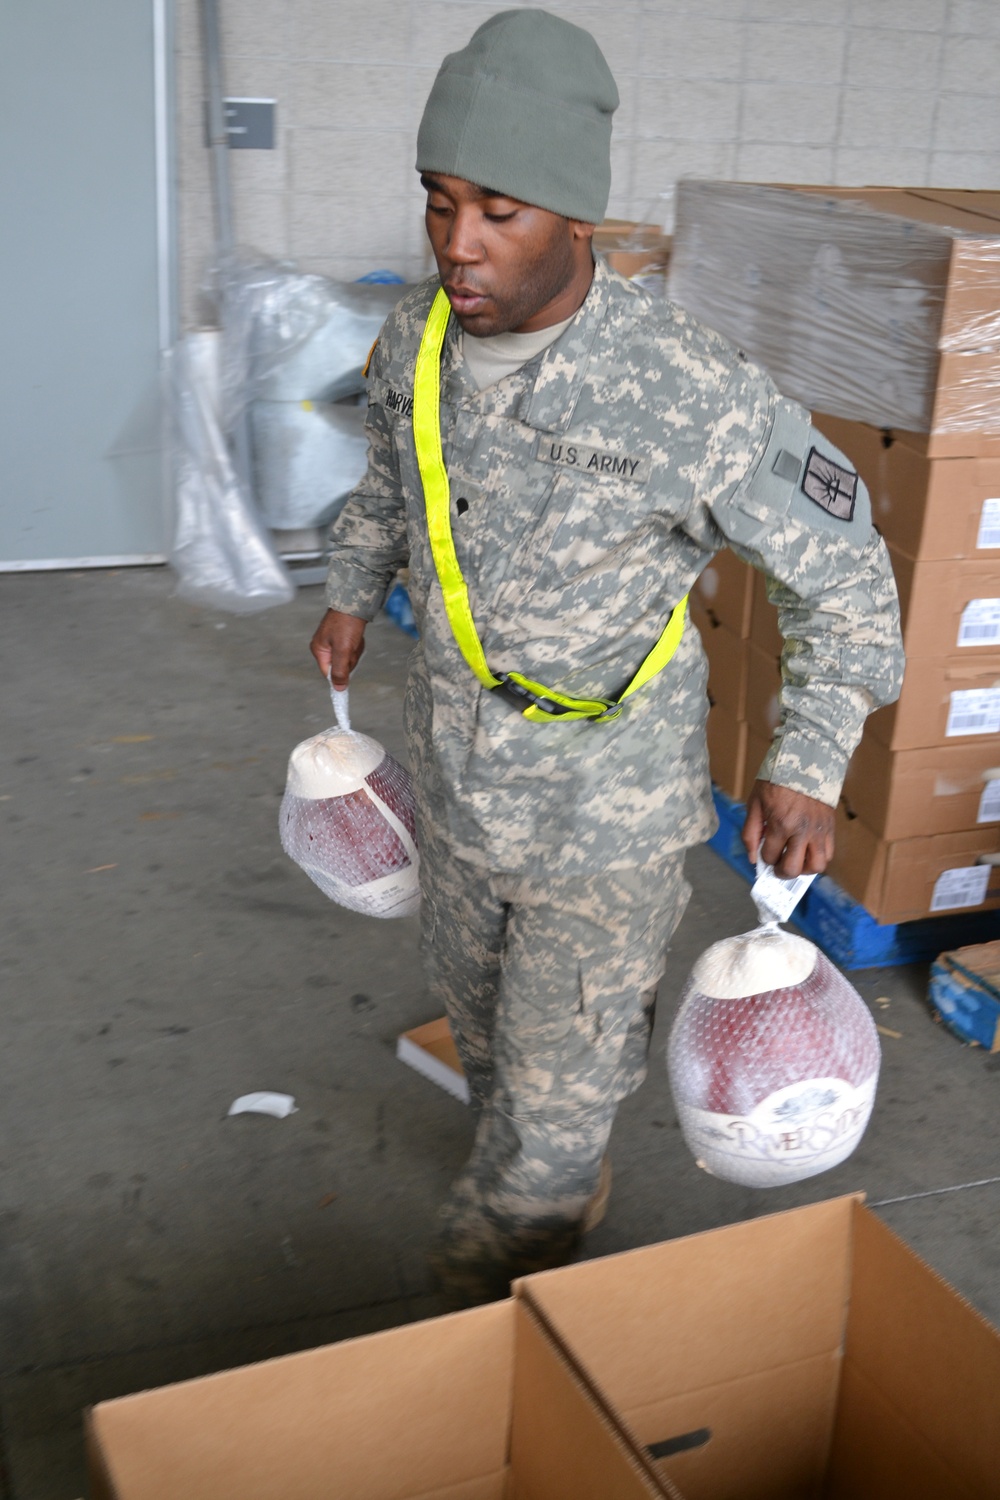 NY Guard to help Sandy victims over Thanksgiving holiday